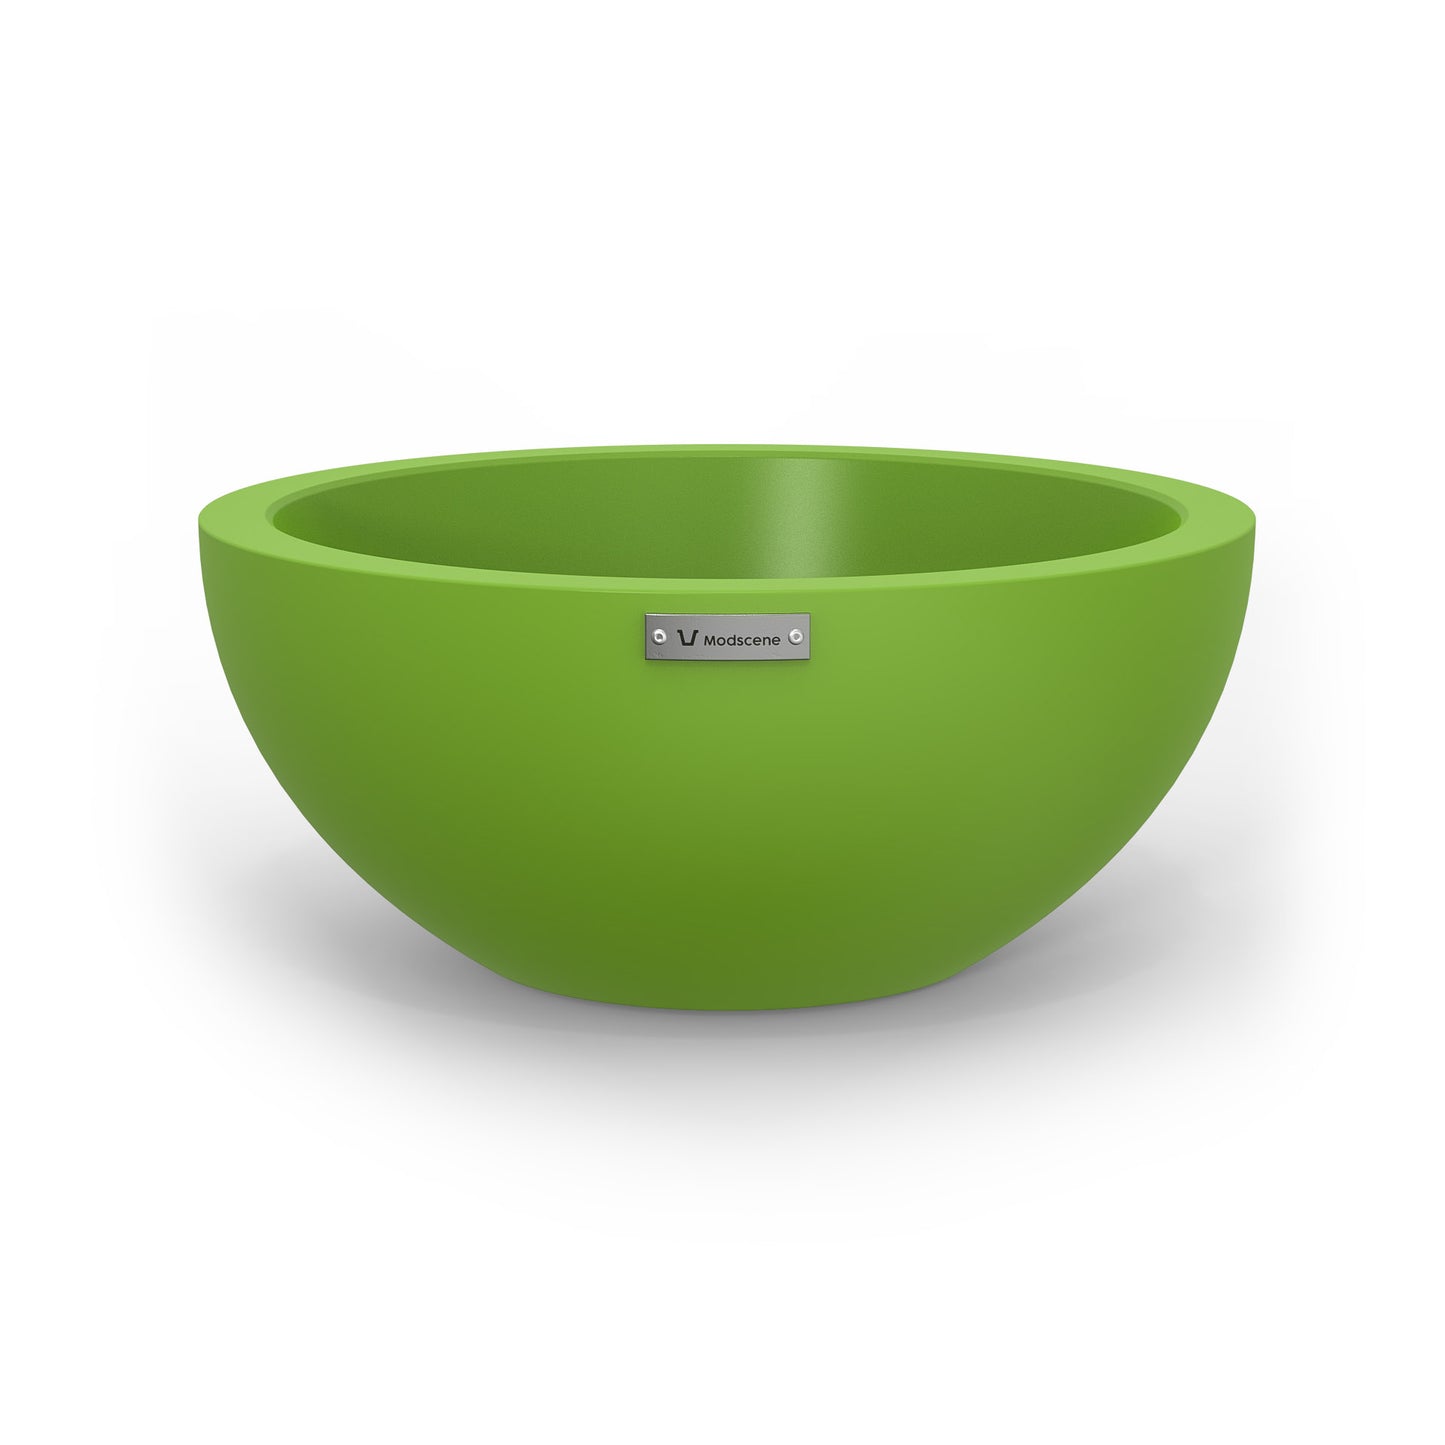 A small Modscene planter bowl in green. New Zealand made.